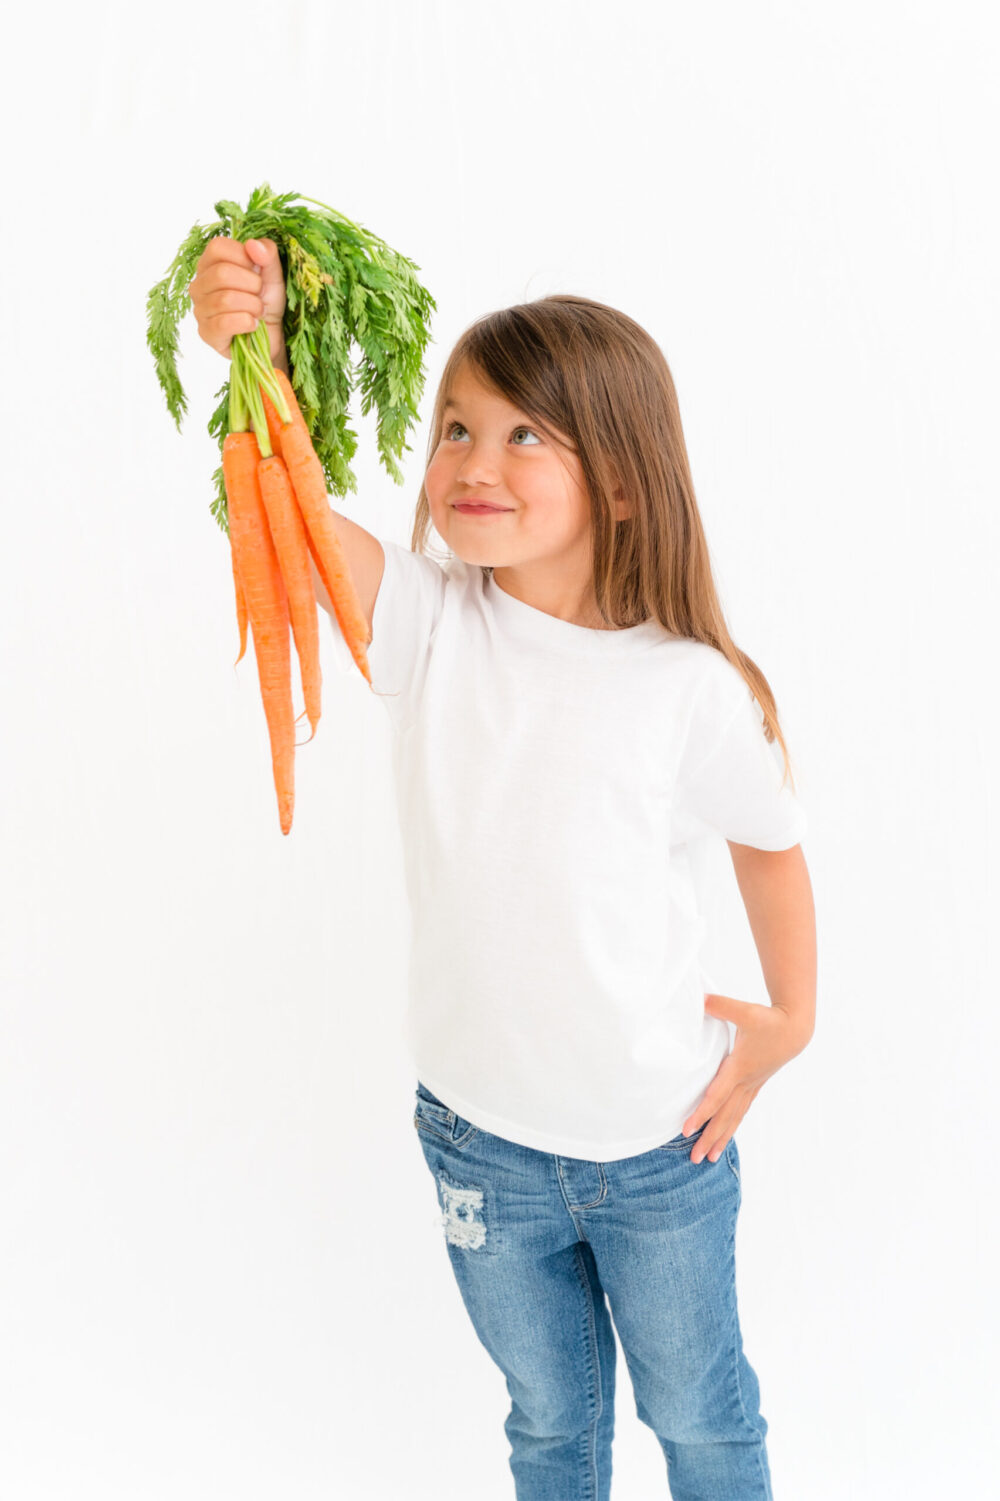 Get Our Free Picky Eater Guide